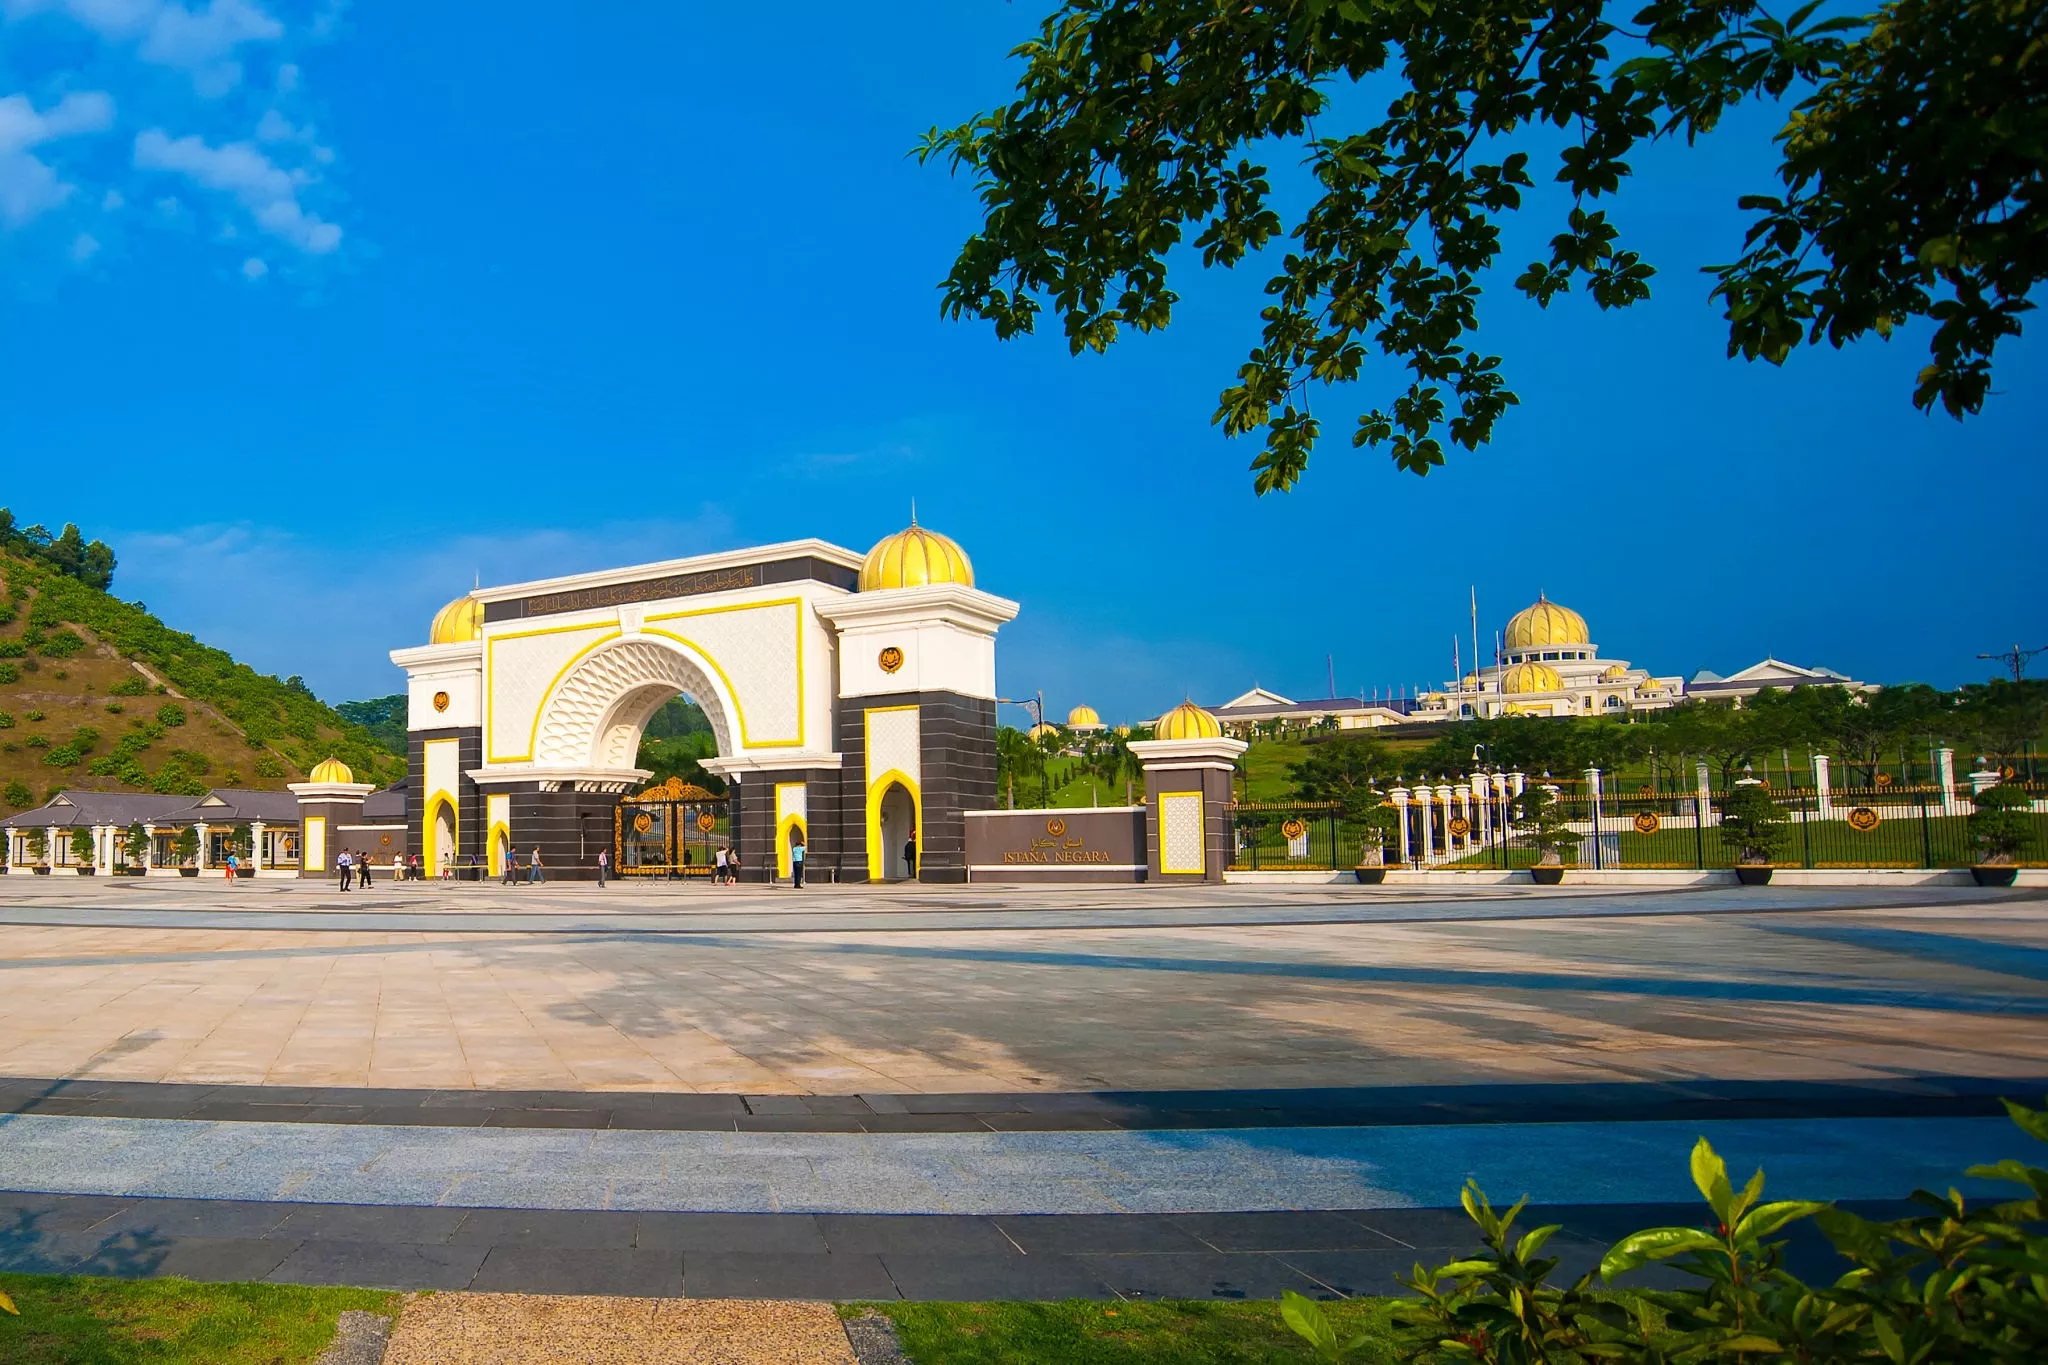 National Palace in Malaysia, East Asia | Architecture - Rated 3.6